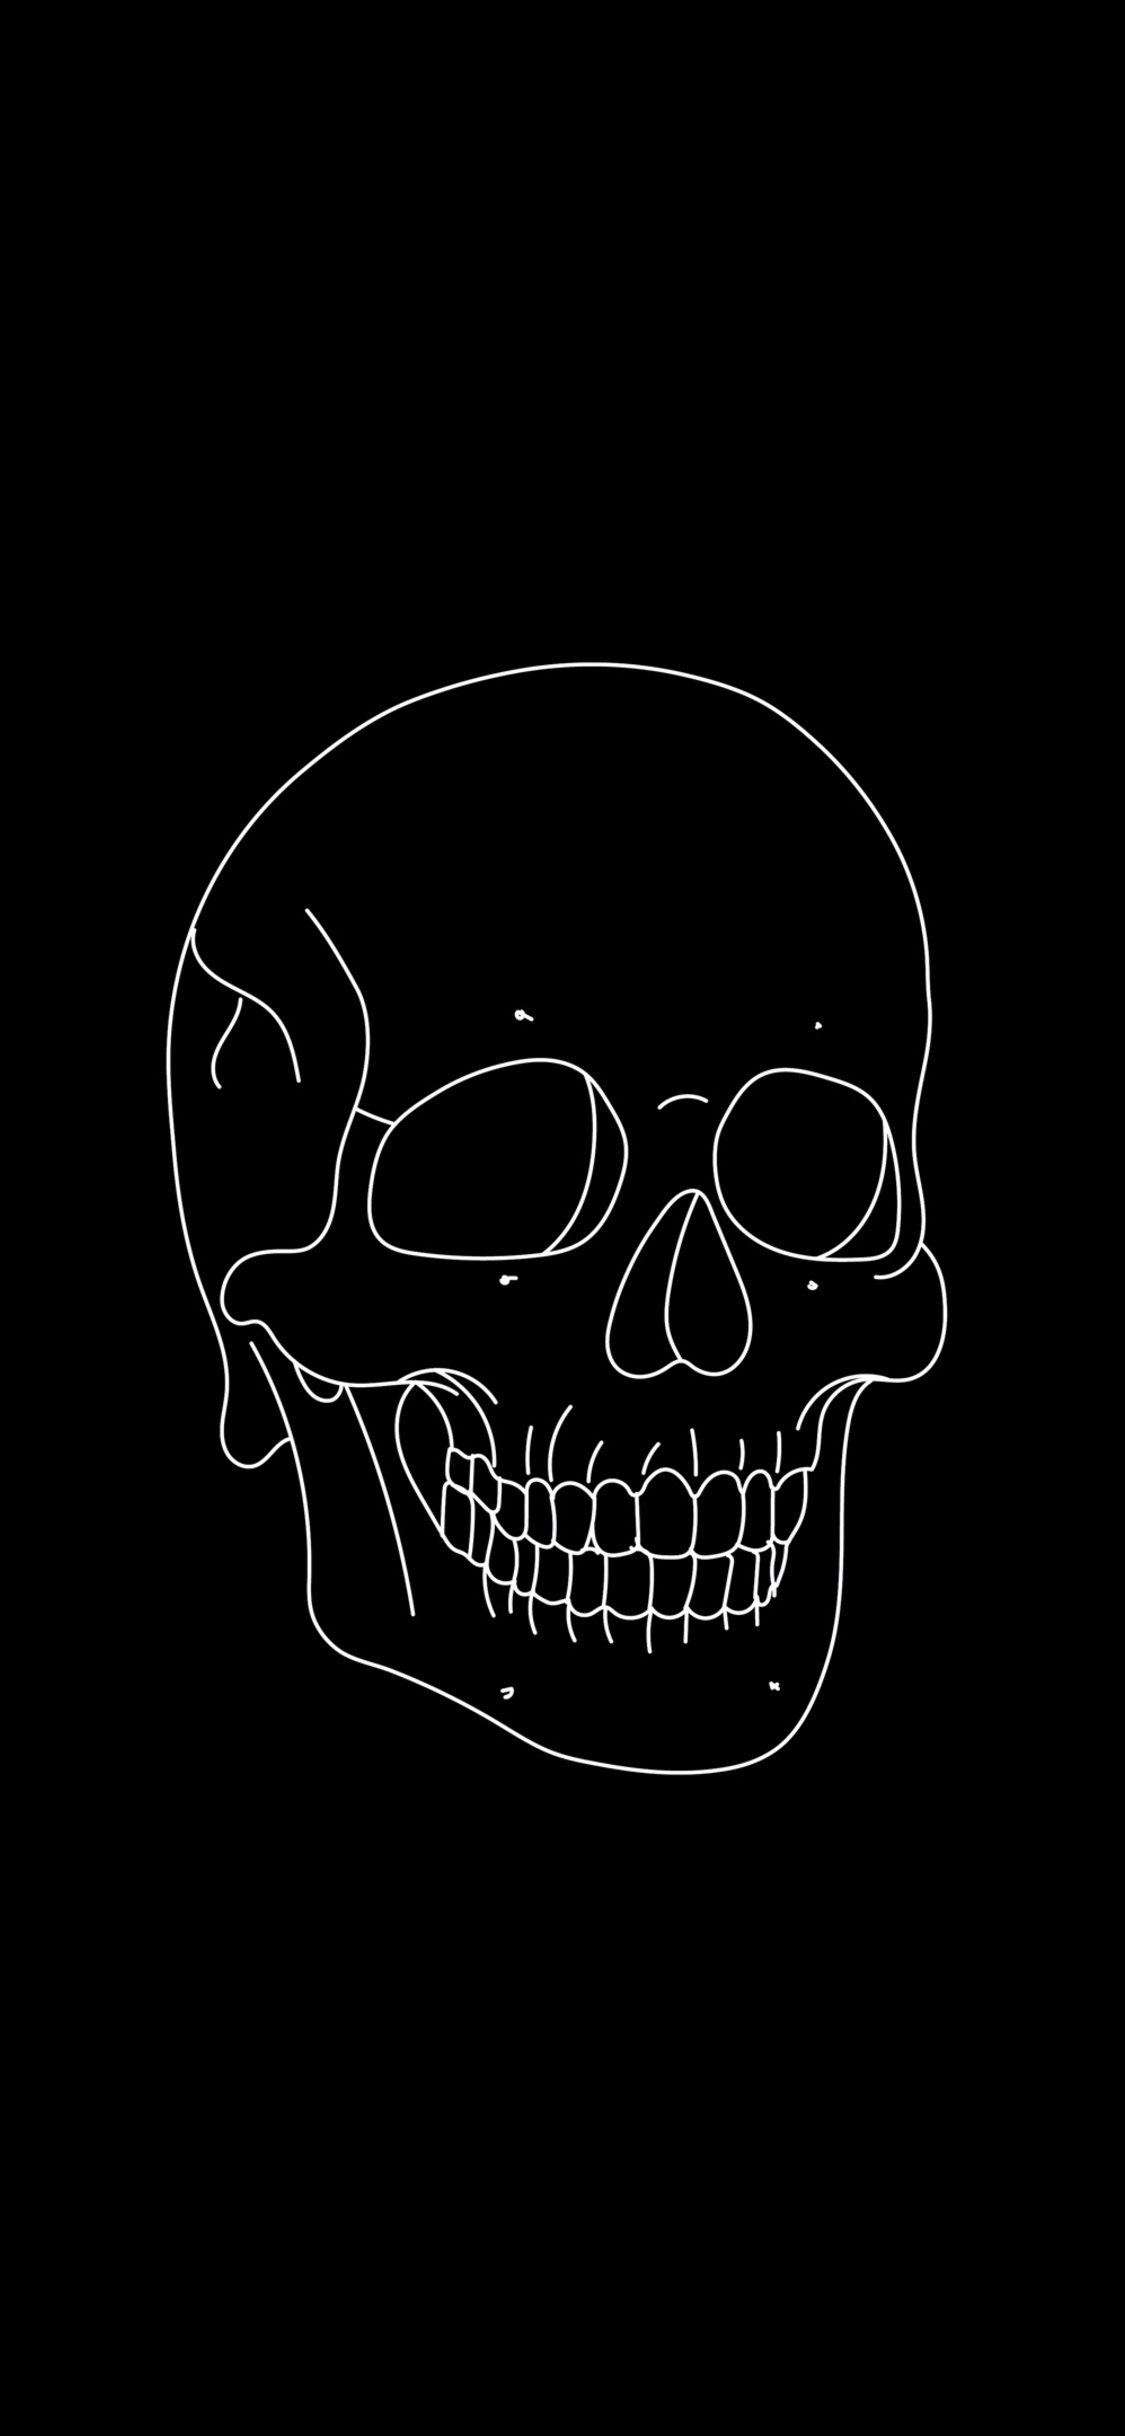 Skull Light Minimal 4k iPhone XS, iPhone iPhone X HD 4k Wallpaper, Image, Background, Photo and Picture